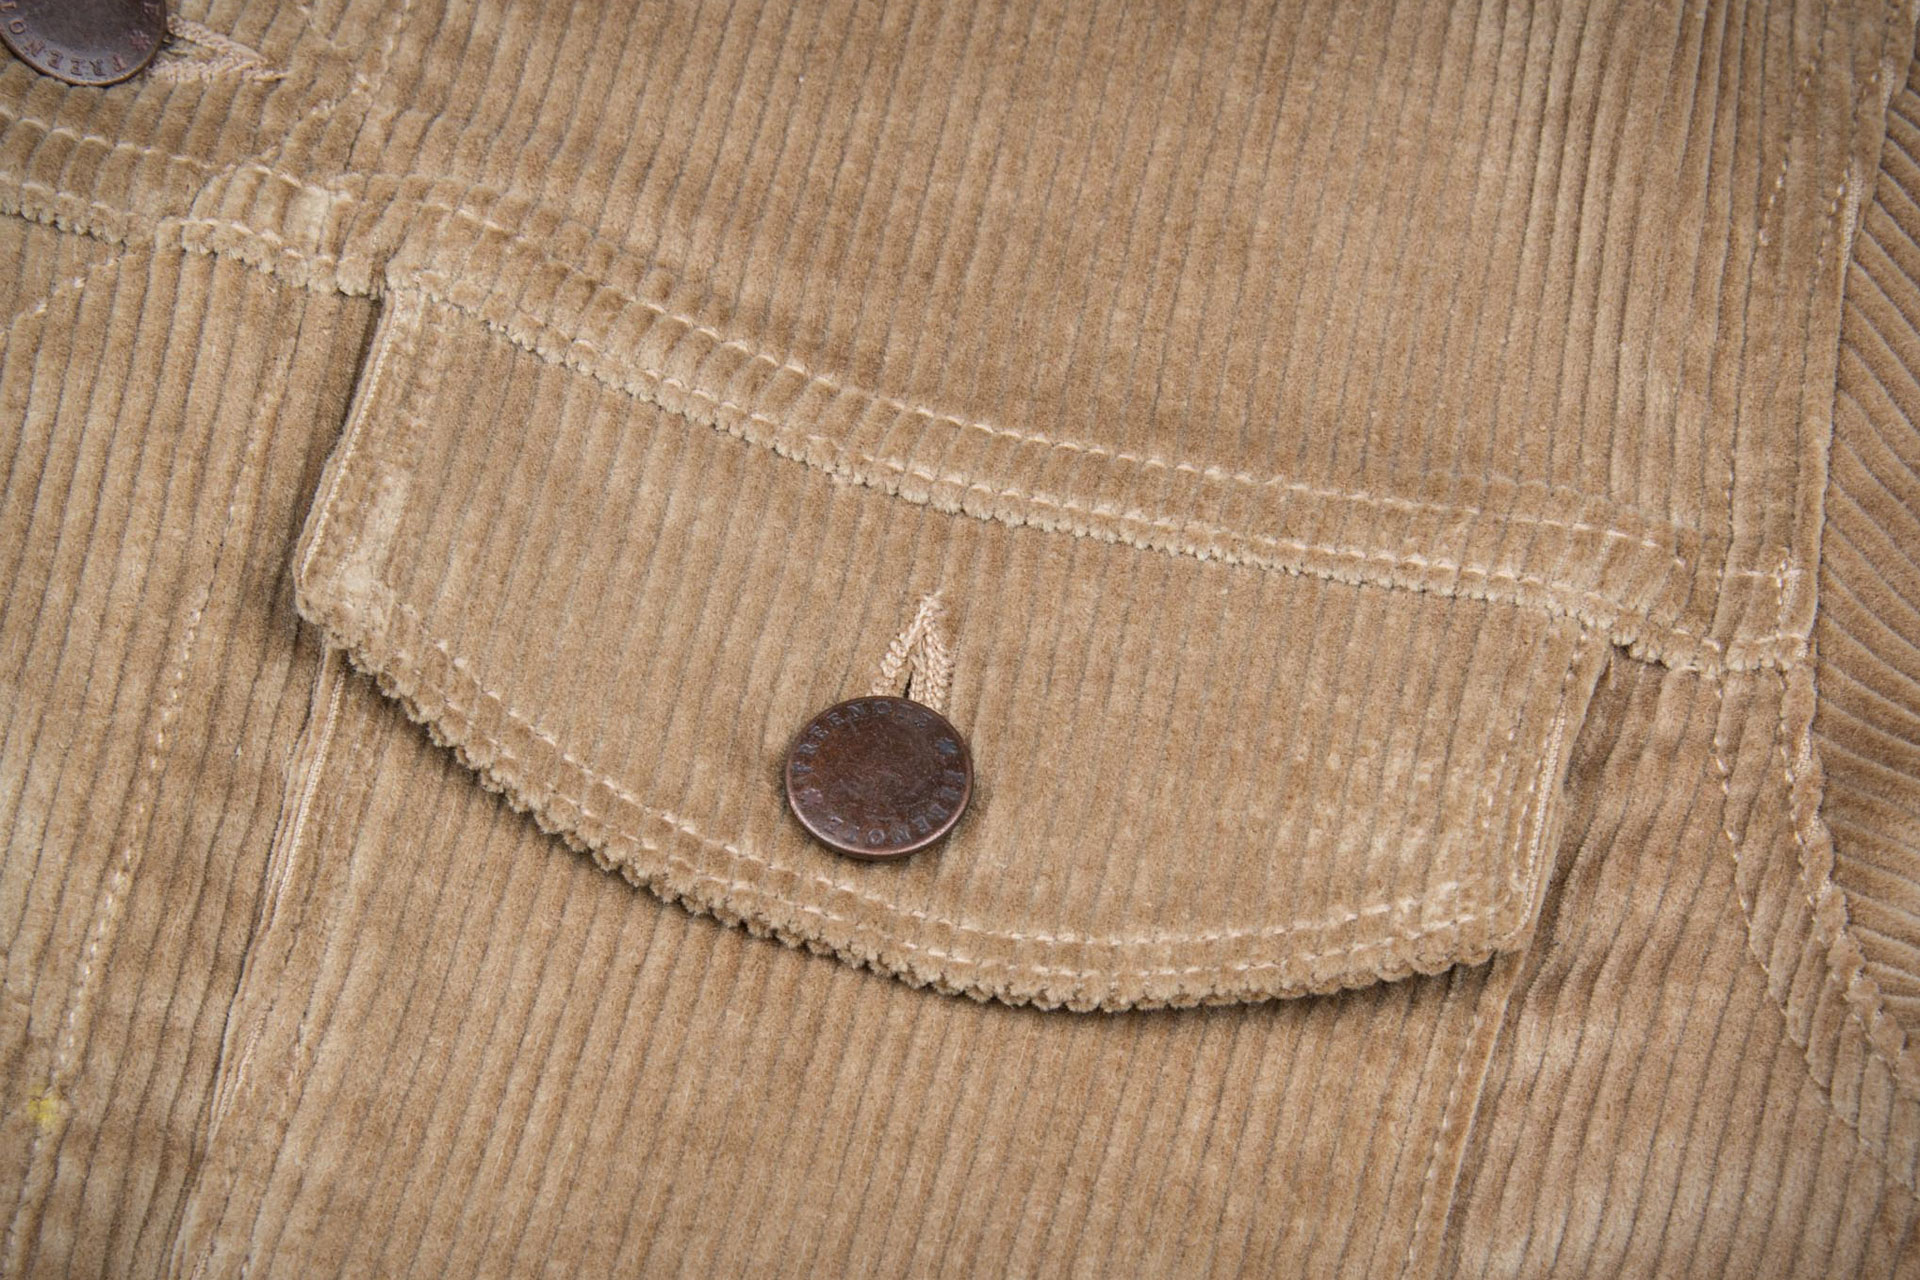 Freenote Cloth Classic Corduroy Jacket | Uncrate